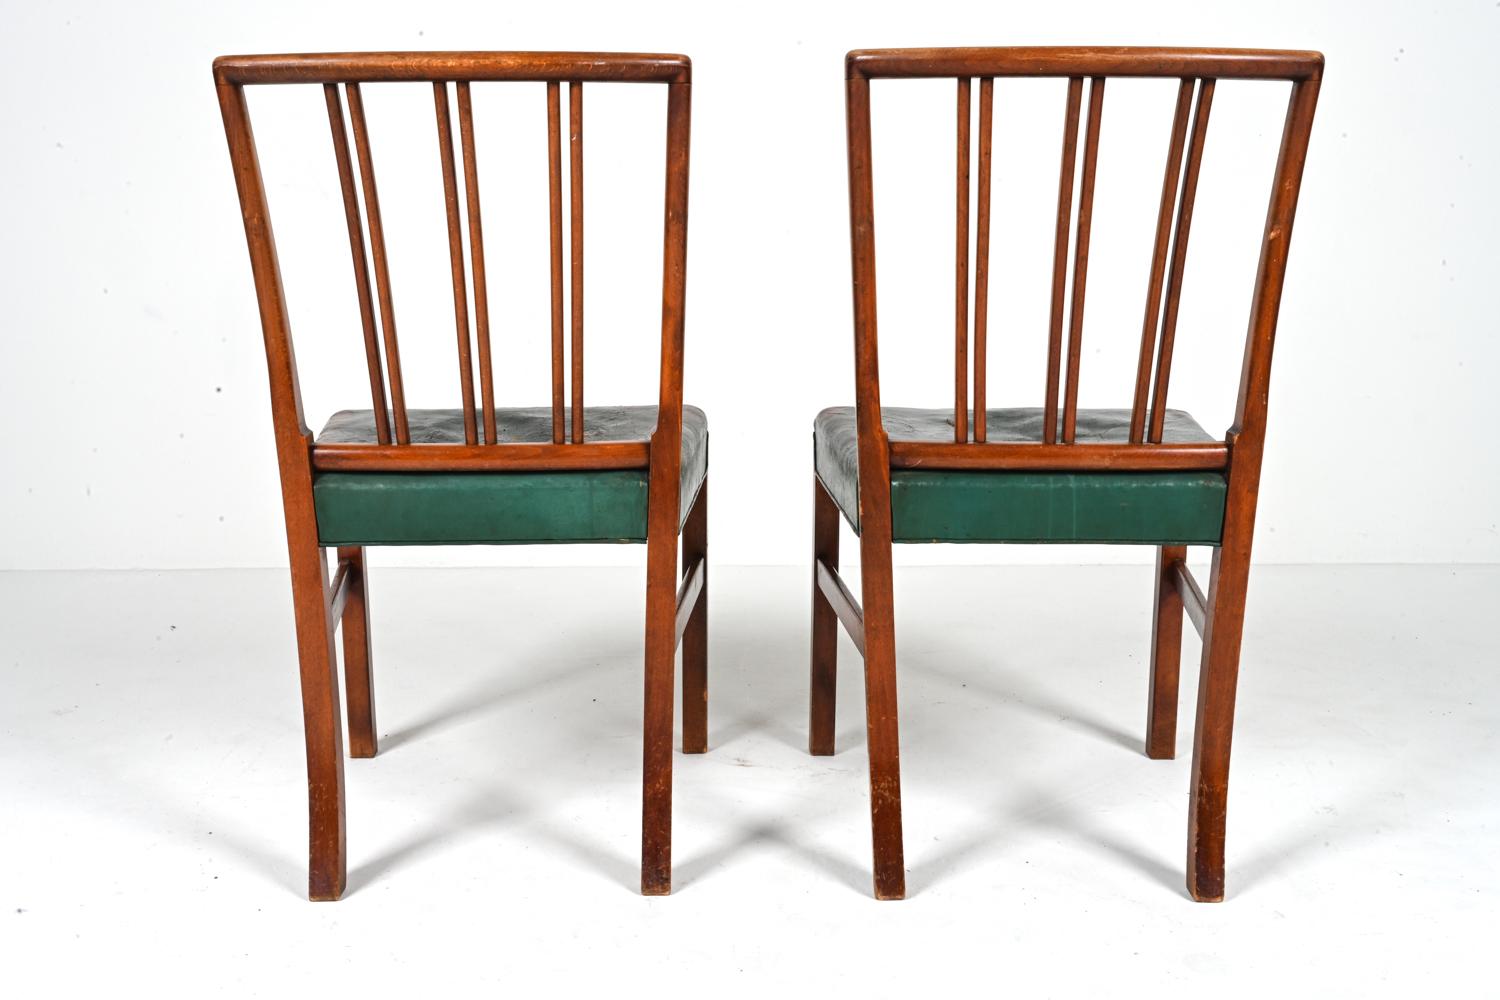 '12' Rare Model 1675B Dining Chairs by Ole Wanscher Fritz Hansen, c. 1940's For Sale 10